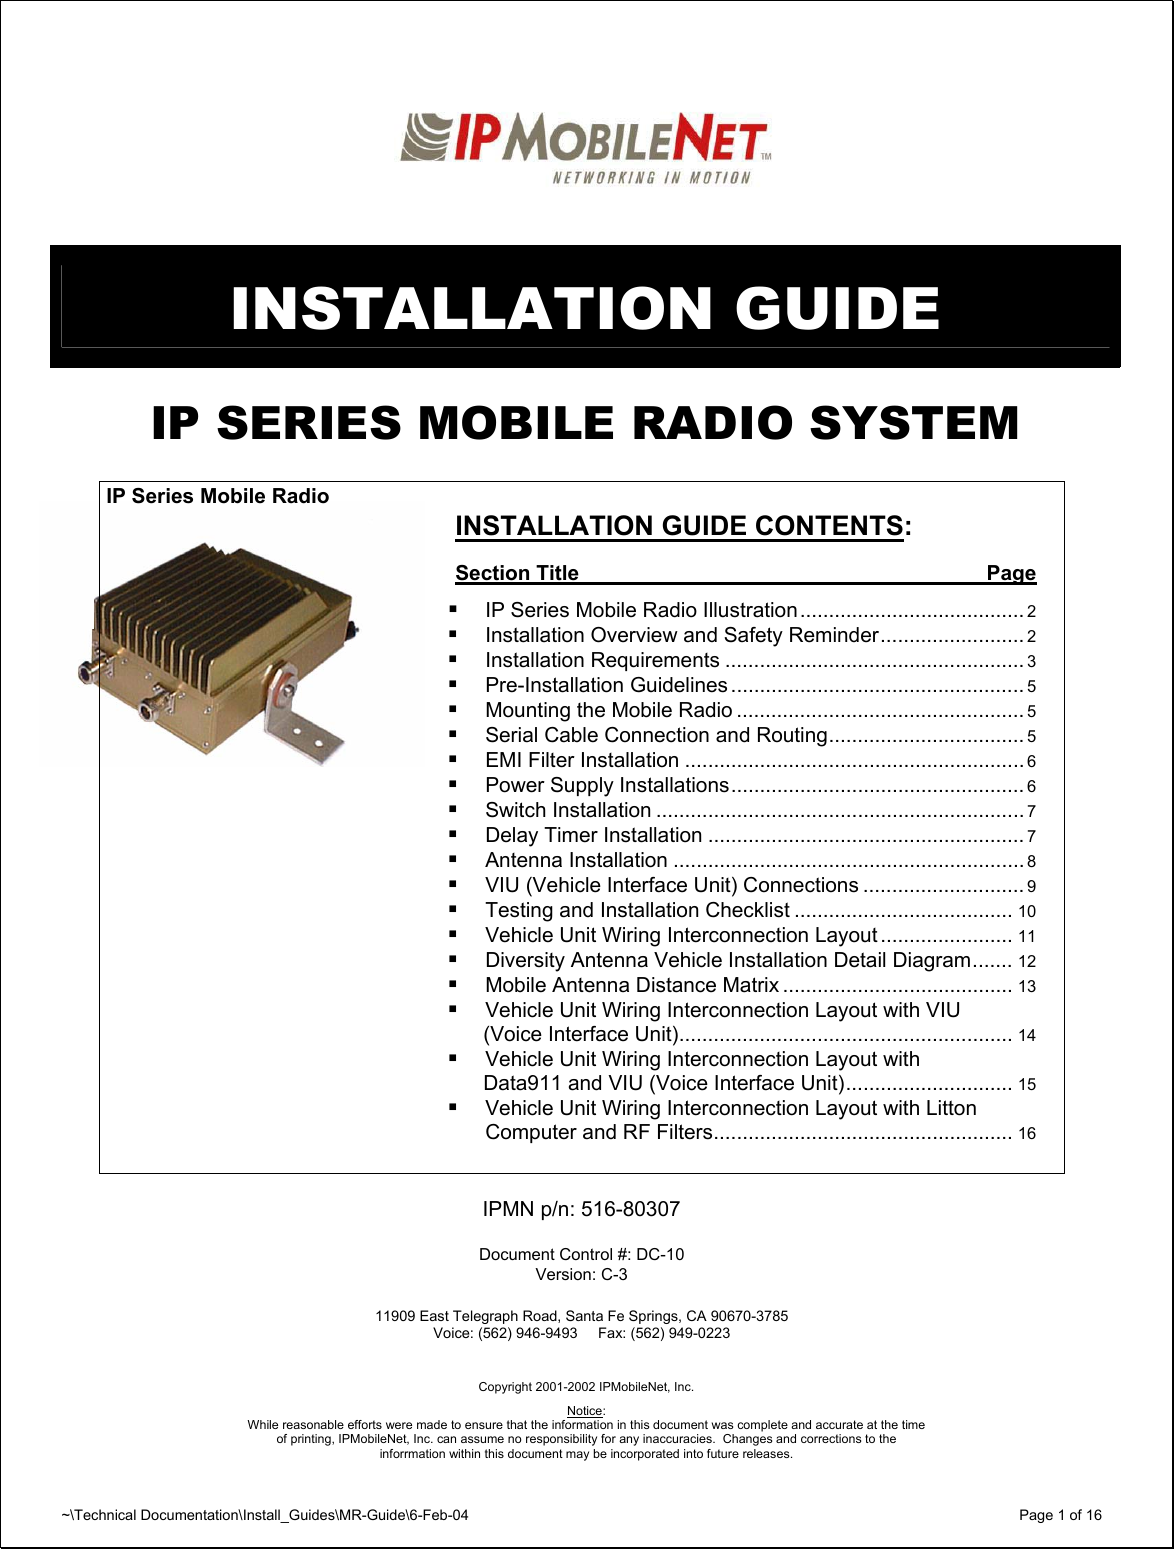 ~\Technical Documentation\Install_Guides\MR-Guide\6-Feb-04   Page 1 of 16    INSTALLATION GUIDE  IP SERIES MOBILE RADIO SYSTEM      INSTALLATION GUIDE CONTENTS:  Section Title  Page   IP Series Mobile Radio Illustration....................................... 2  Installation Overview and Safety Reminder......................... 2  Installation Requirements .................................................... 3  Pre-Installation Guidelines ................................................... 5  Mounting the Mobile Radio .................................................. 5  Serial Cable Connection and Routing.................................. 5  EMI Filter Installation ........................................................... 6  Power Supply Installations................................................... 6  Switch Installation ................................................................ 7  Delay Timer Installation ....................................................... 7  Antenna Installation ............................................................. 8  VIU (Vehicle Interface Unit) Connections ............................ 9  Testing and Installation Checklist ...................................... 10  Vehicle Unit Wiring Interconnection Layout ....................... 11  Diversity Antenna Vehicle Installation Detail Diagram....... 12  Mobile Antenna Distance Matrix ........................................ 13  Vehicle Unit Wiring Interconnection Layout with VIU   (Voice Interface Unit).......................................................... 14  Vehicle Unit Wiring Interconnection Layout with   Data911 and VIU (Voice Interface Unit)............................. 15  Vehicle Unit Wiring Interconnection Layout with Litton Computer and RF Filters.................................................... 16   IPMN p/n: 516-80307  Document Control #: DC-10 Version: C-3  11909 East Telegraph Road, Santa Fe Springs, CA 90670-3785 Voice: (562) 946-9493     Fax: (562) 949-0223     Copyright 2001-2002 IPMobileNet, Inc.  Notice:  While reasonable efforts were made to ensure that the information in this document was complete and accurate at the time of printing, IPMobileNet, Inc. can assume no responsibility for any inaccuracies.  Changes and corrections to the  inforrmation within this document may be incorporated into future releases.IP Series Mobile Radio 